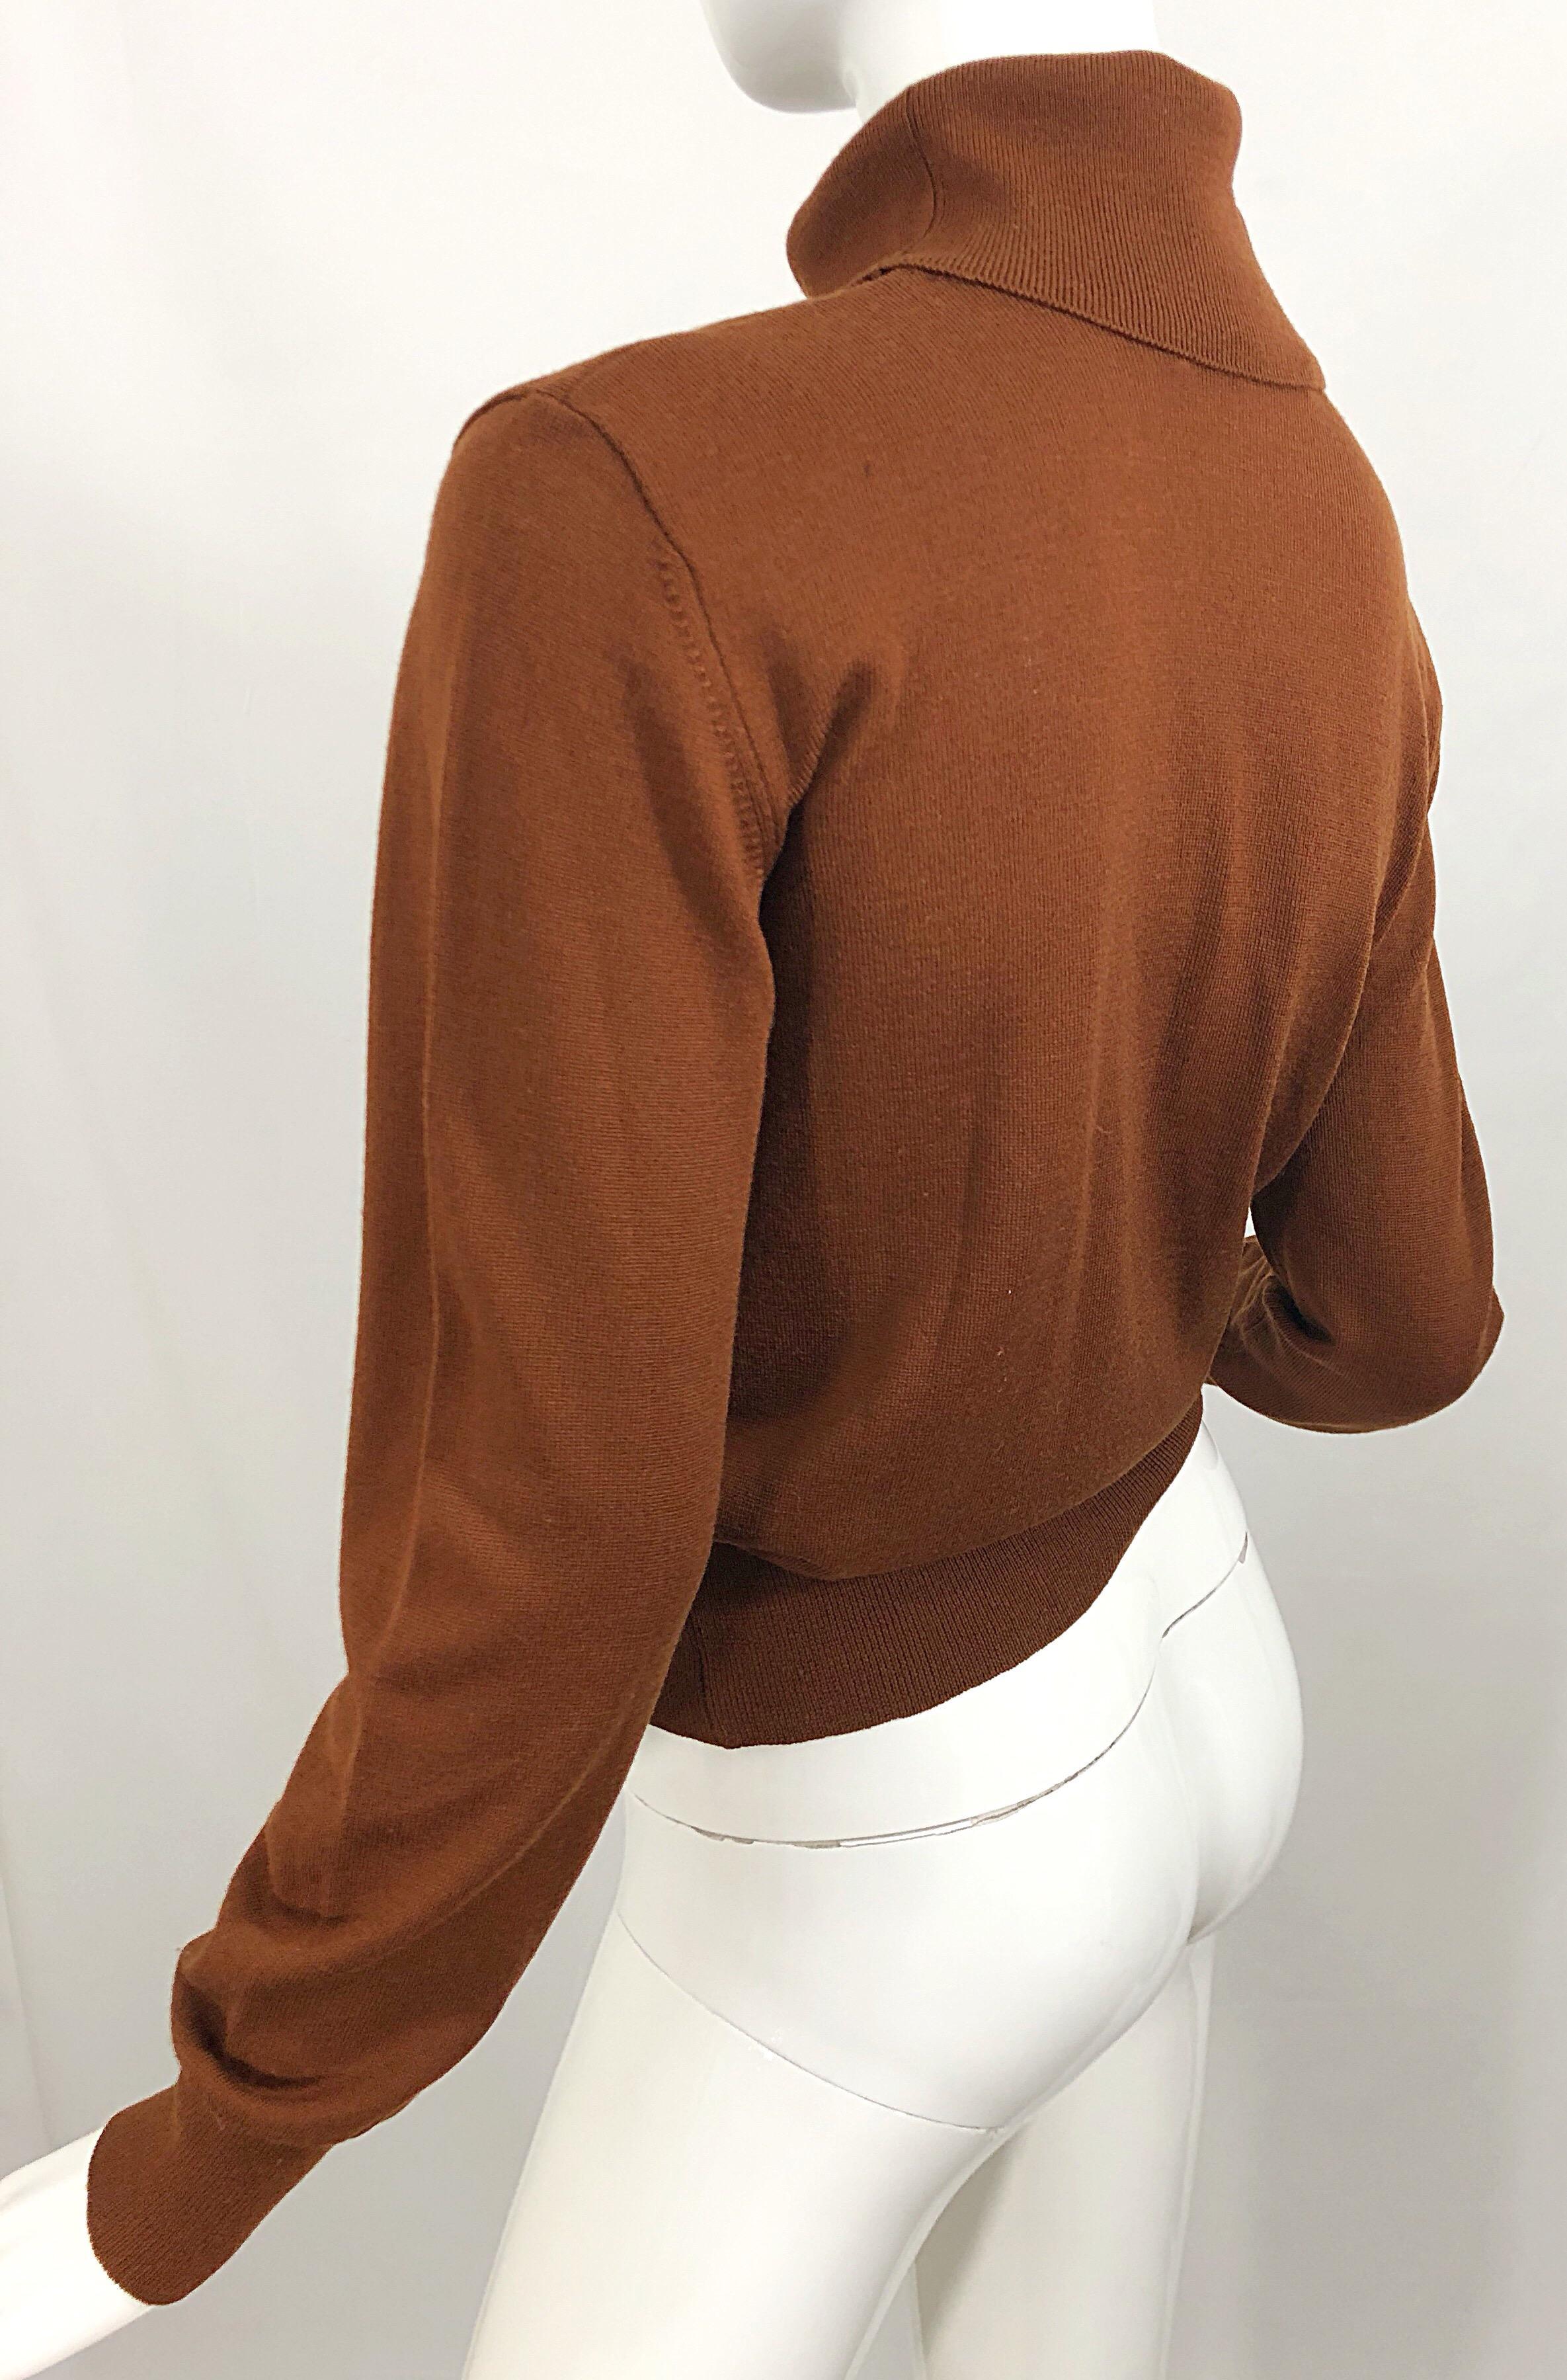 Vintage Escada by Margaretha Ley 1990s Caramel Brown Wool Turltleneck Sweater In Excellent Condition For Sale In San Diego, CA